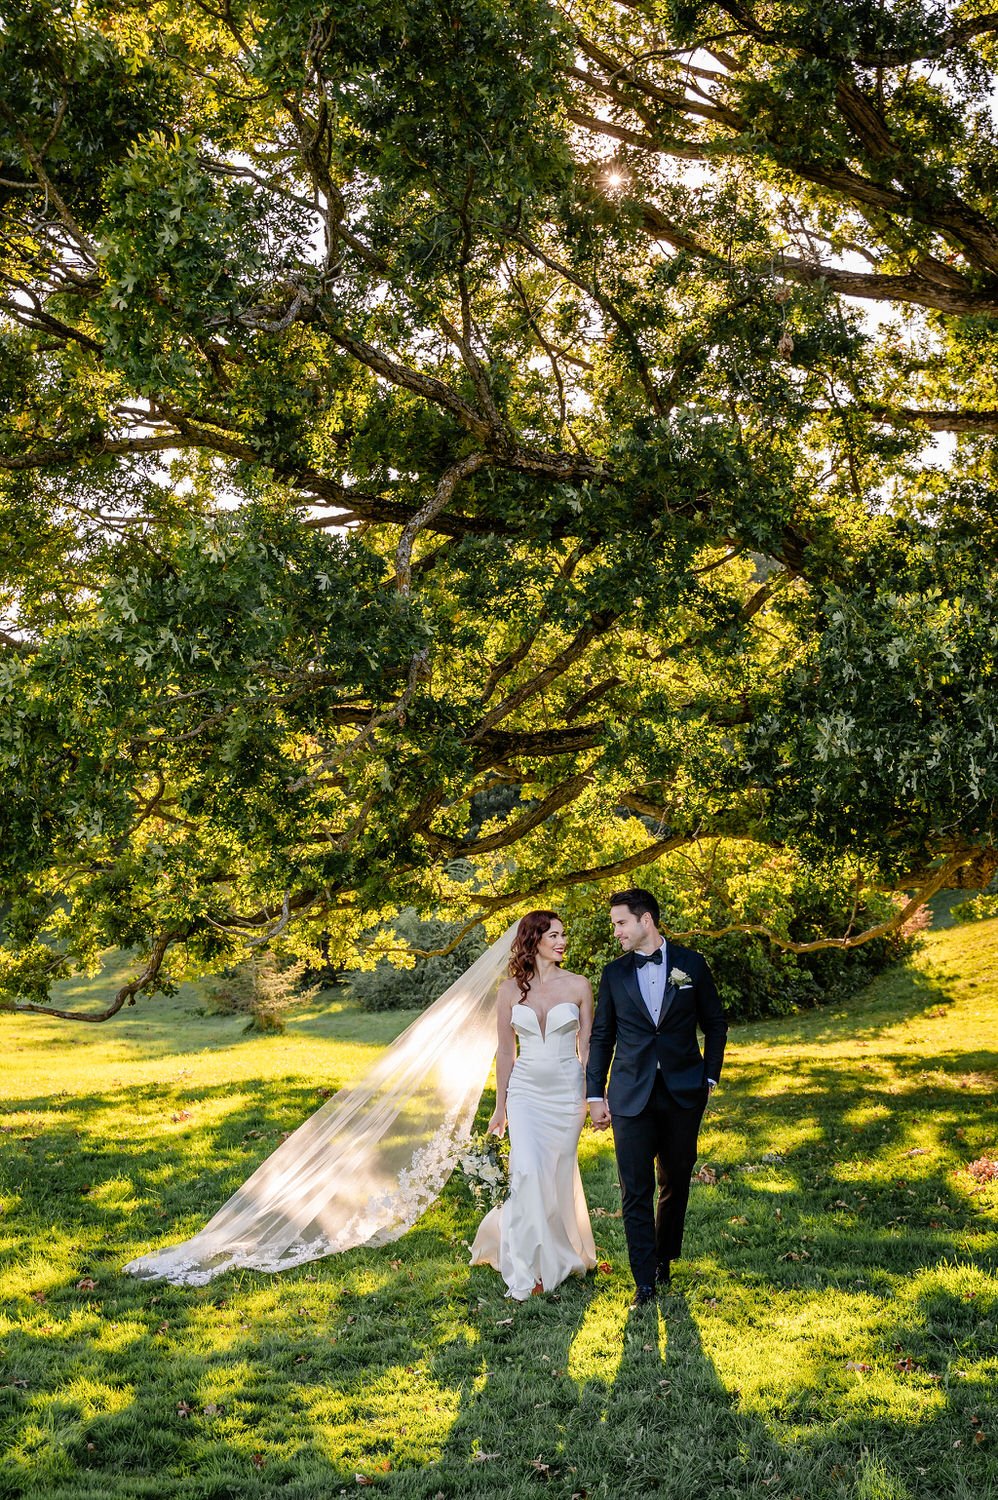 wedding photography in the arboretum in ottawa on a sunny day